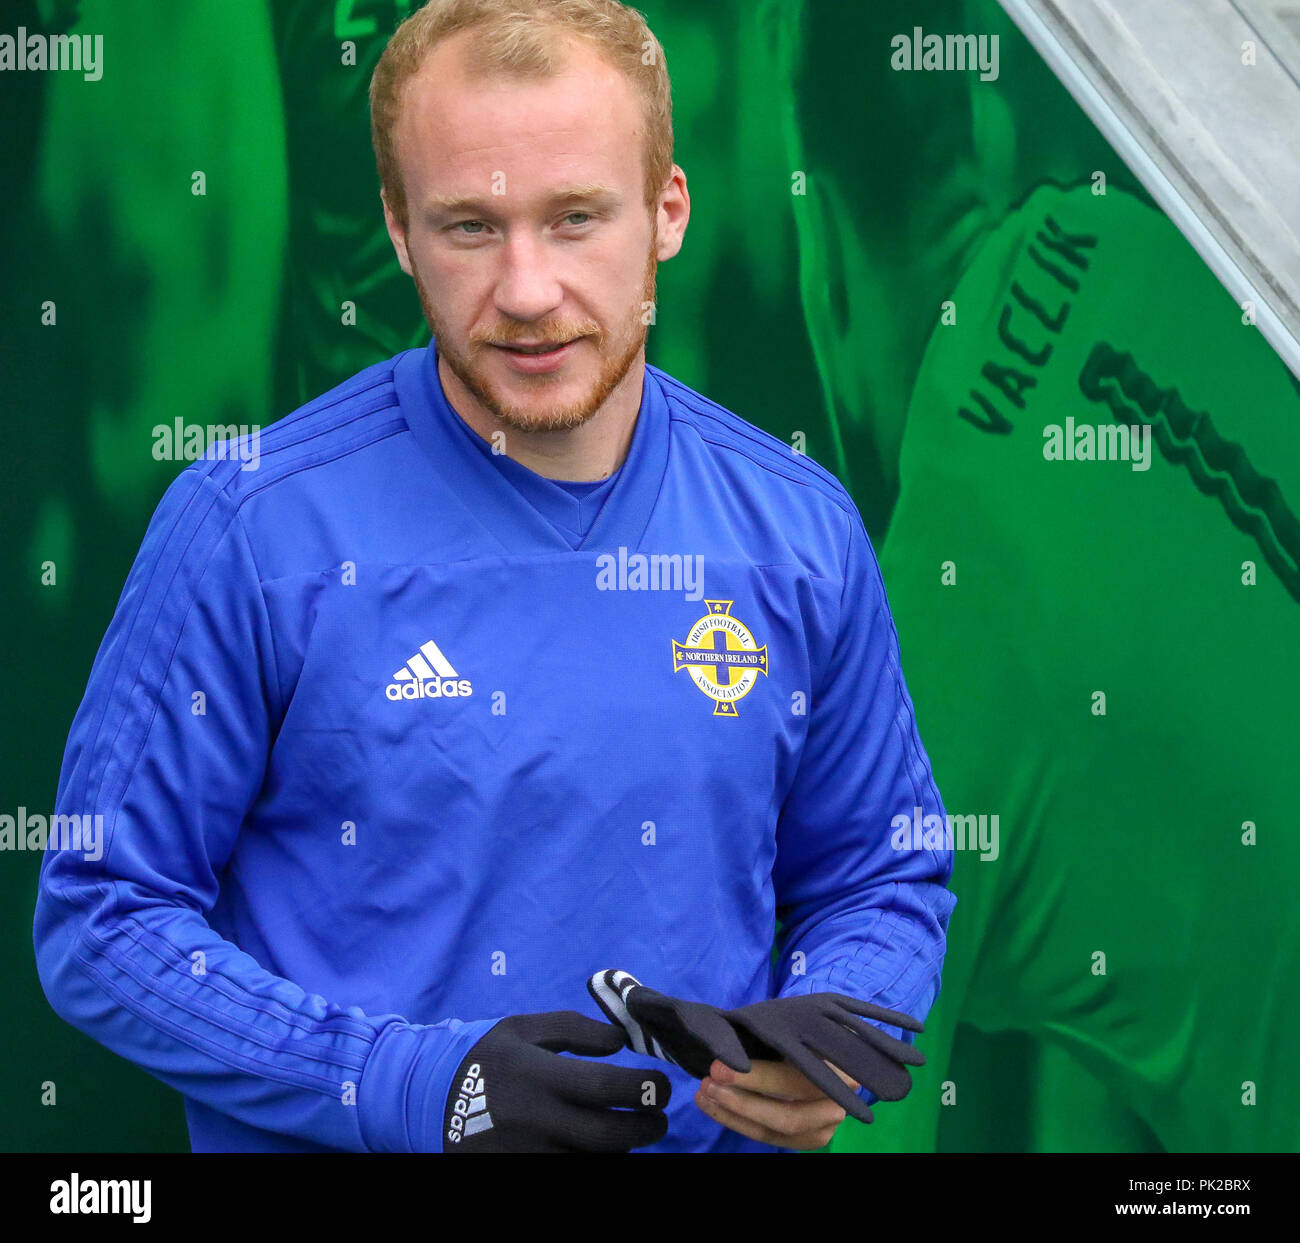 Windsor Park, Belfast, Northern Ireland. 10 September 2018. After Saturday's defeat in the UEFA Nations League, Northern Ireland returned to training this morning at Windsor Park. Tomorrow night they play Israel in a friendly international. Liam Boyce at training. Credit: David Hunter/Alamy Live News. Stock Photo